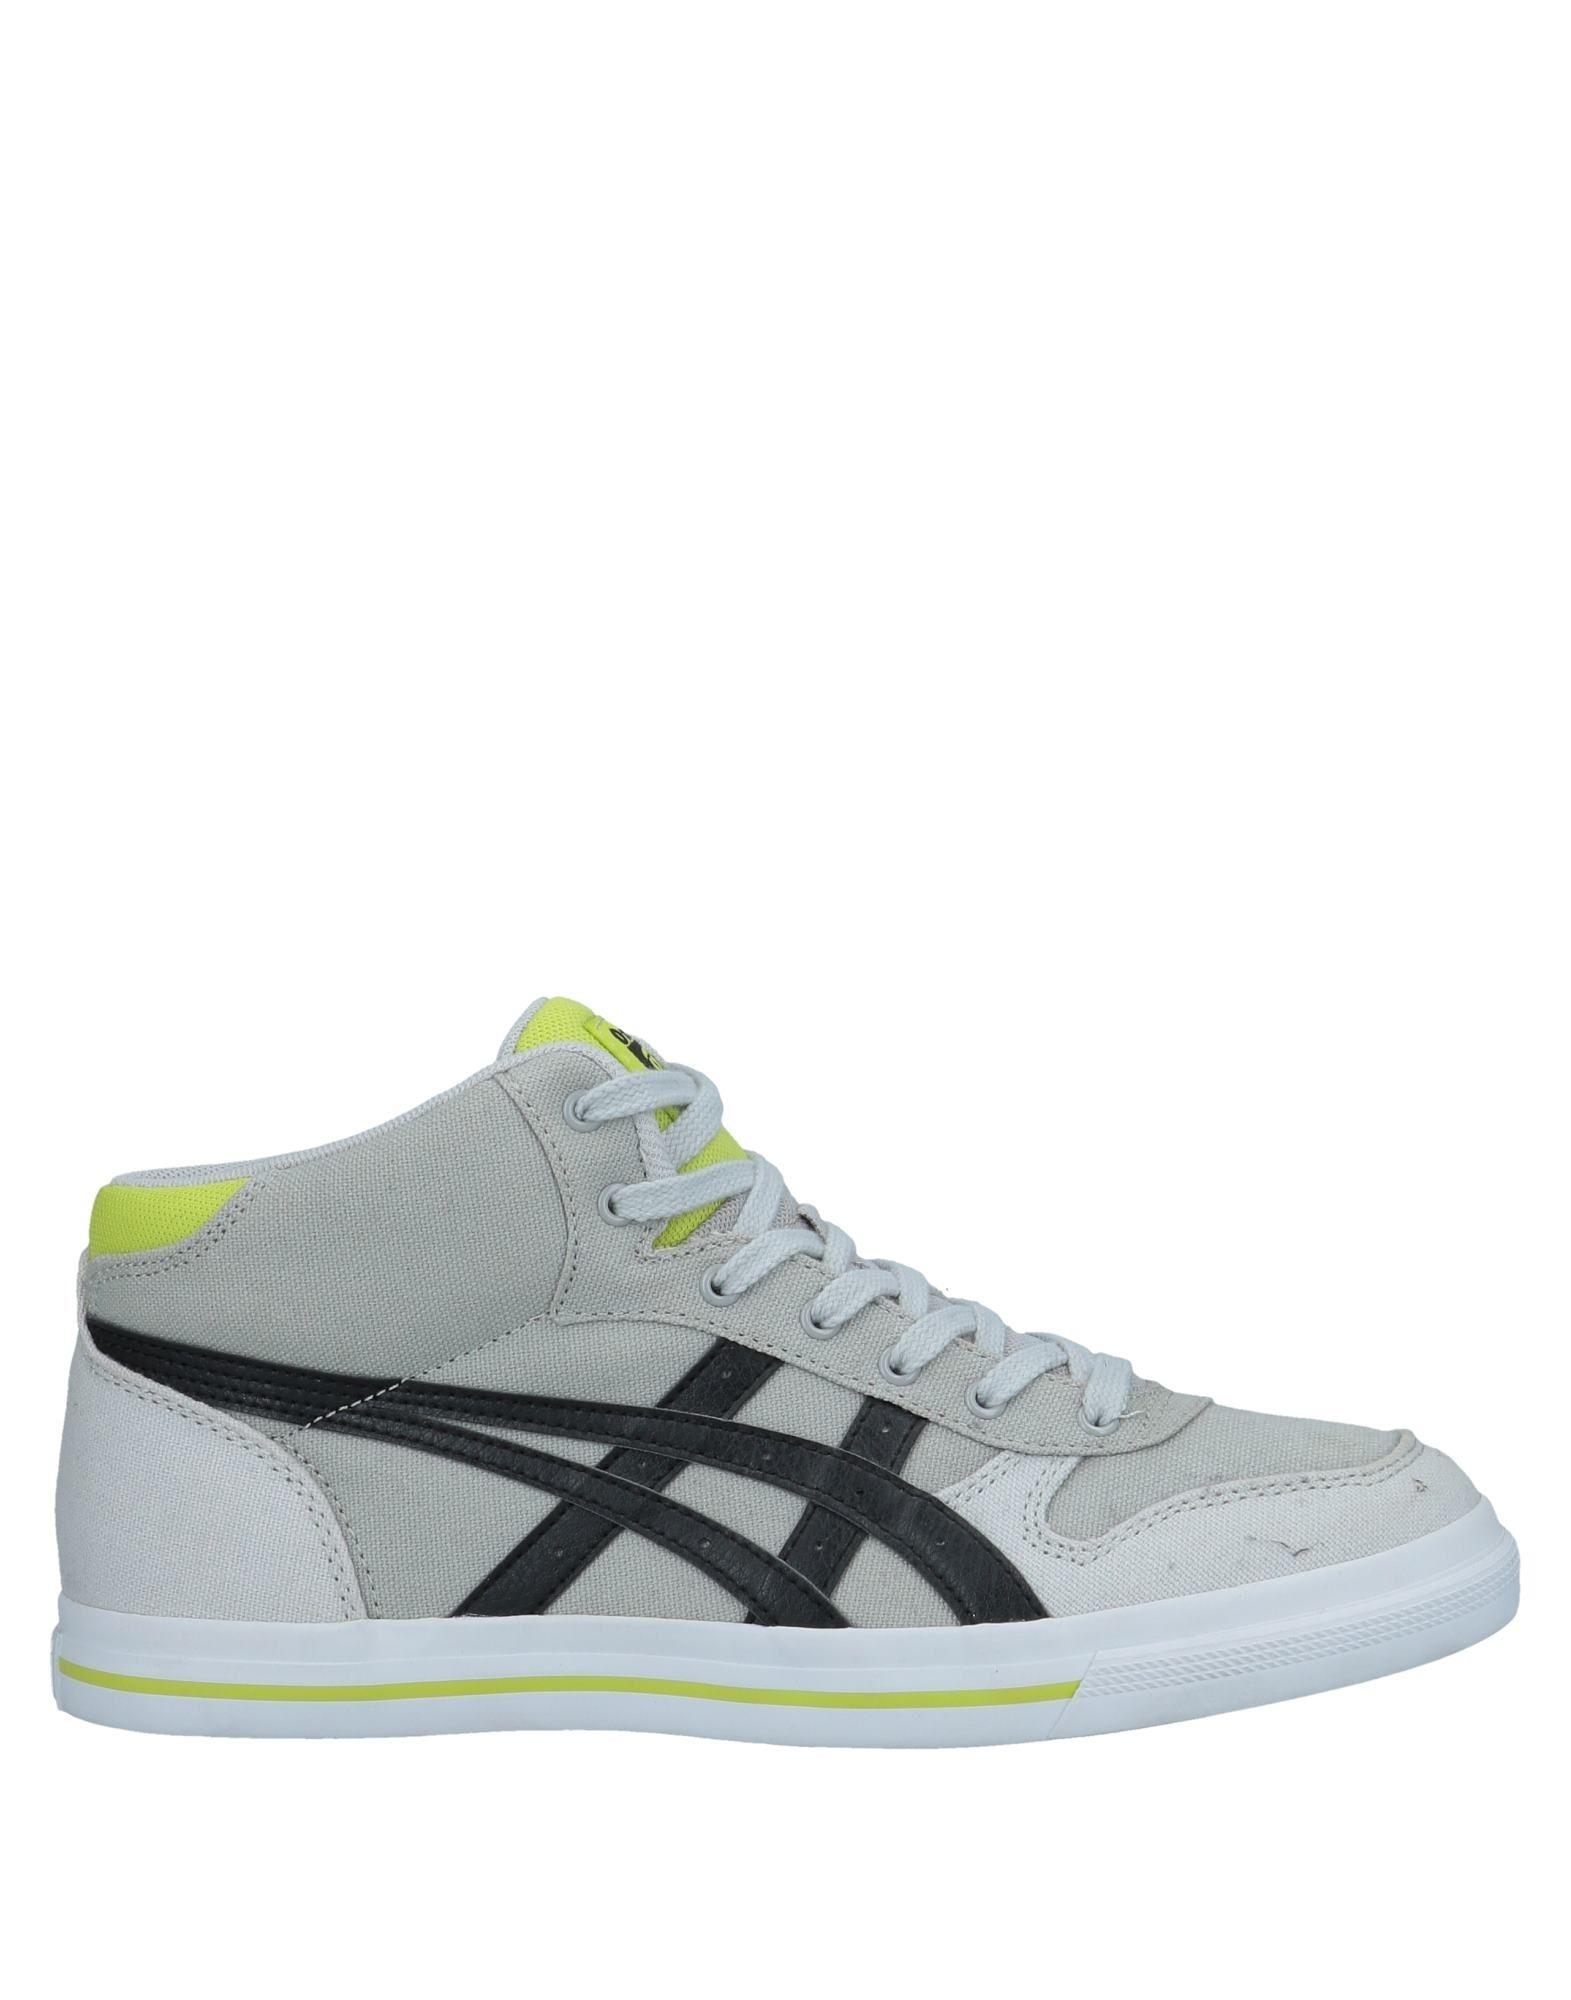 Onitsuka Tiger Canvas High-tops & Sneakers in Grey (Gray) for Men - Lyst